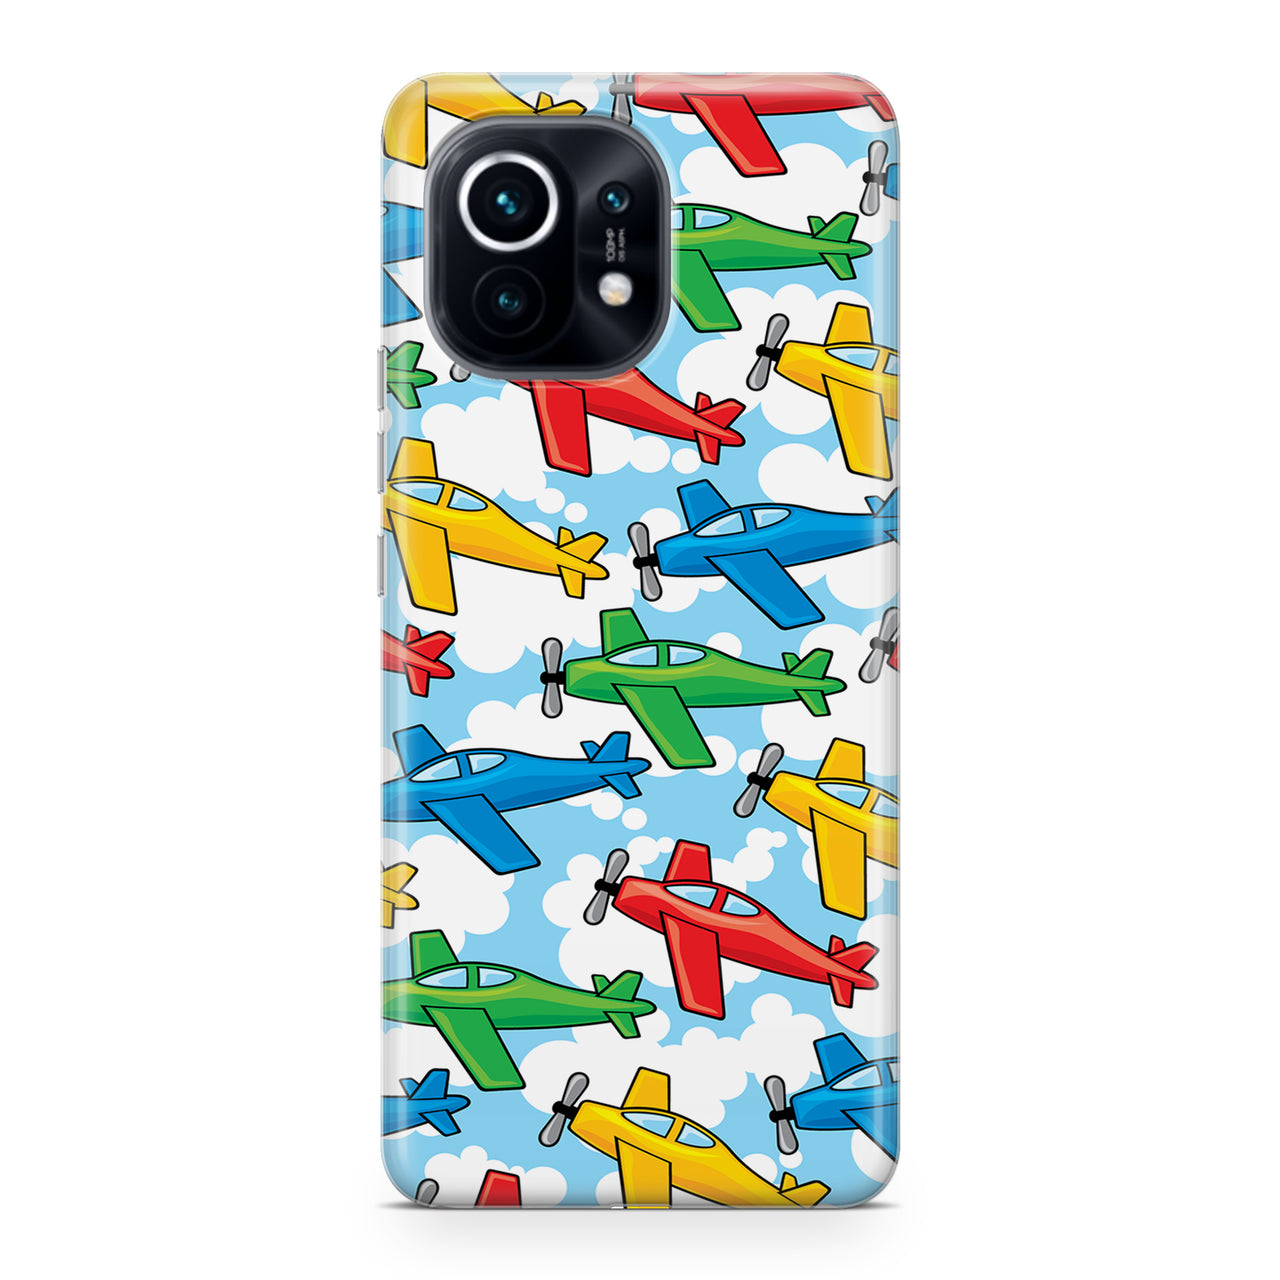 Funny Airplanes Designed Xiaomi Cases